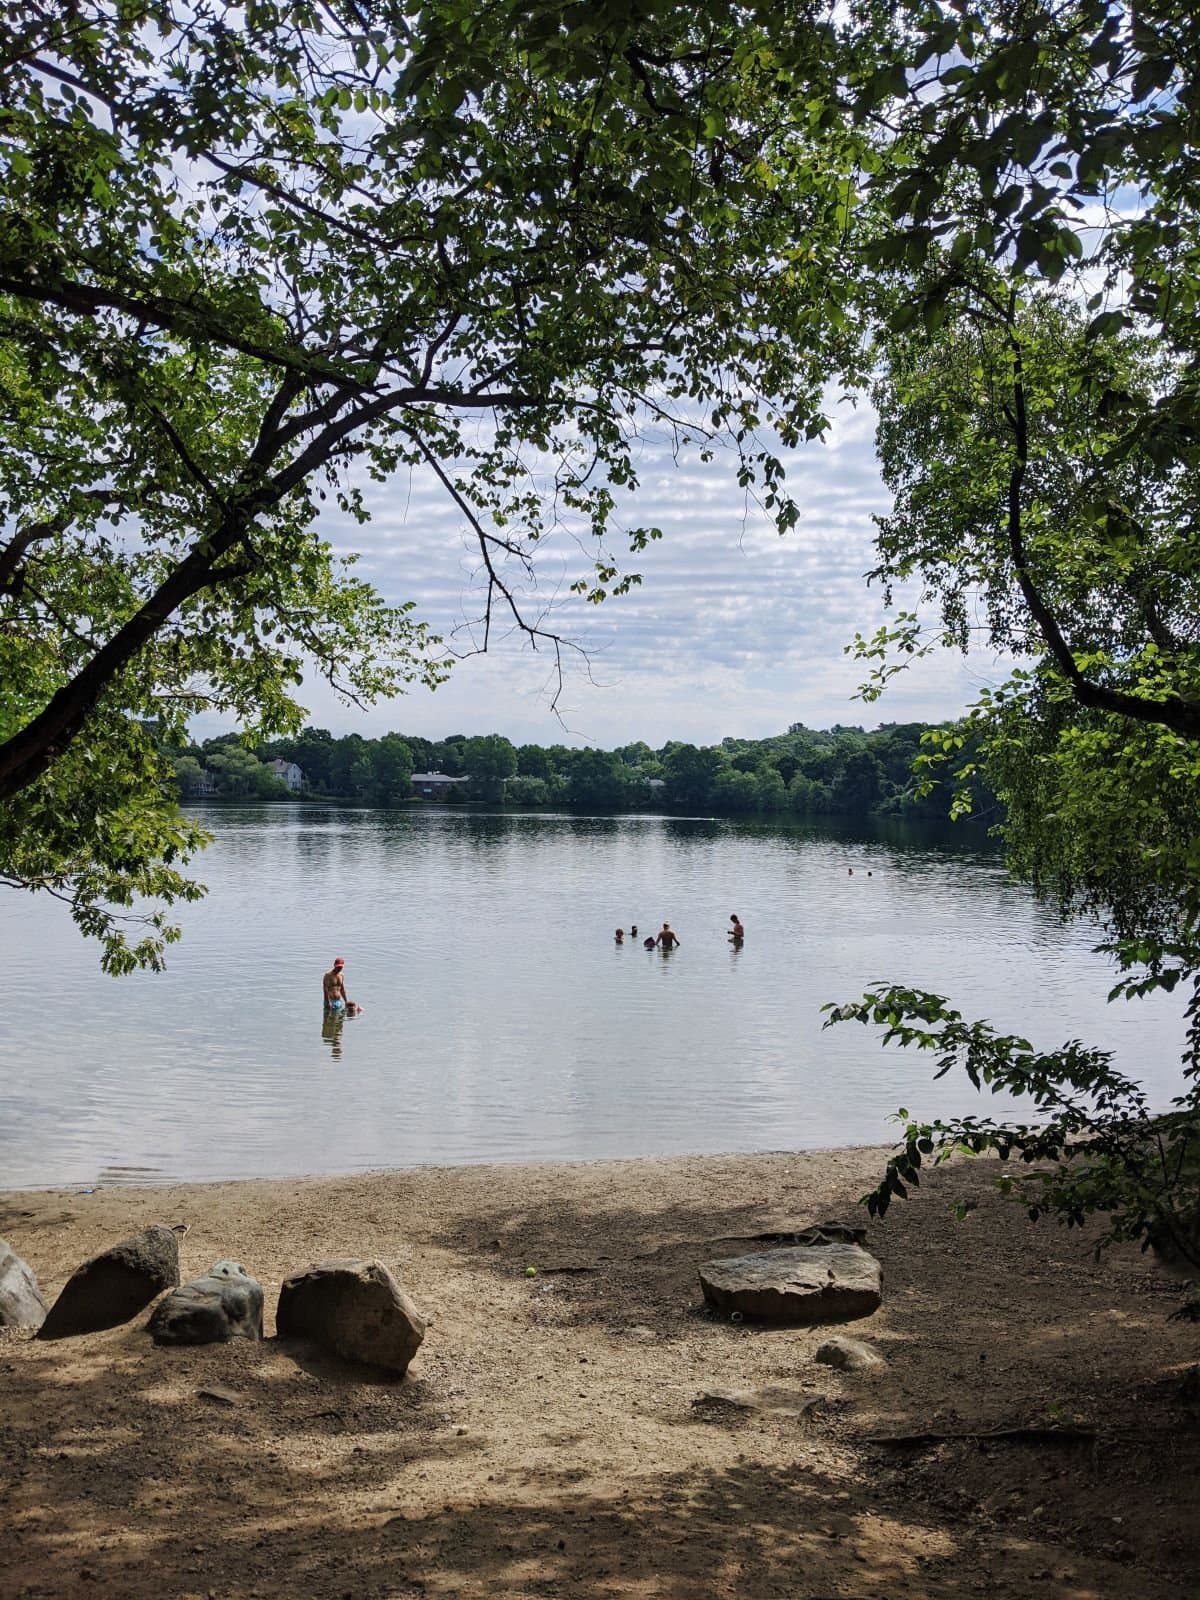 Levingston Cove at Crystal Lake with a sandy beach and trees